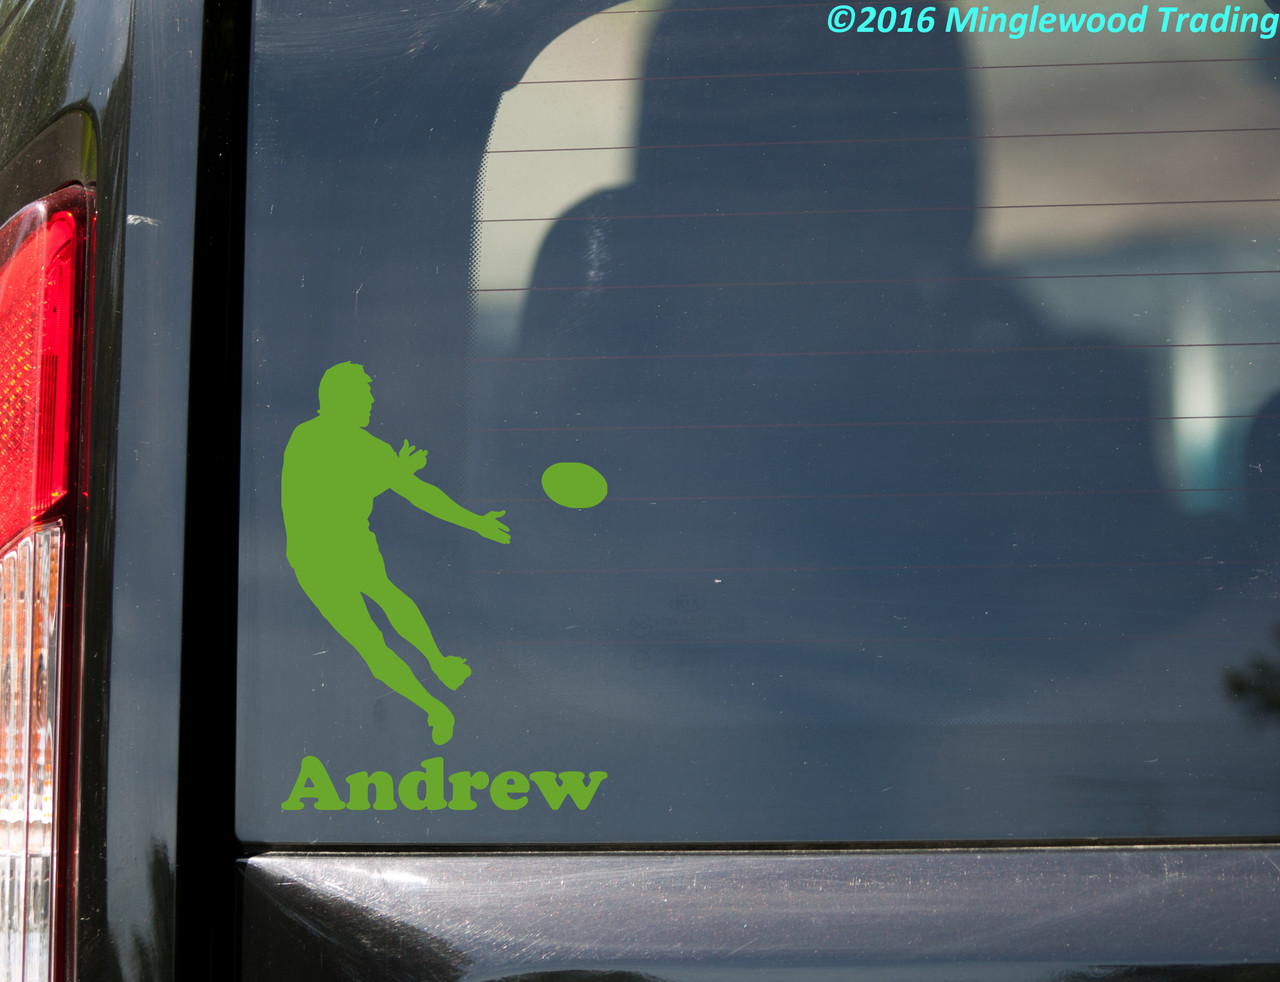 RUGBY PLAYER Vinyl Decal Sticker w/ Customized Name 6" x 4.25" Football